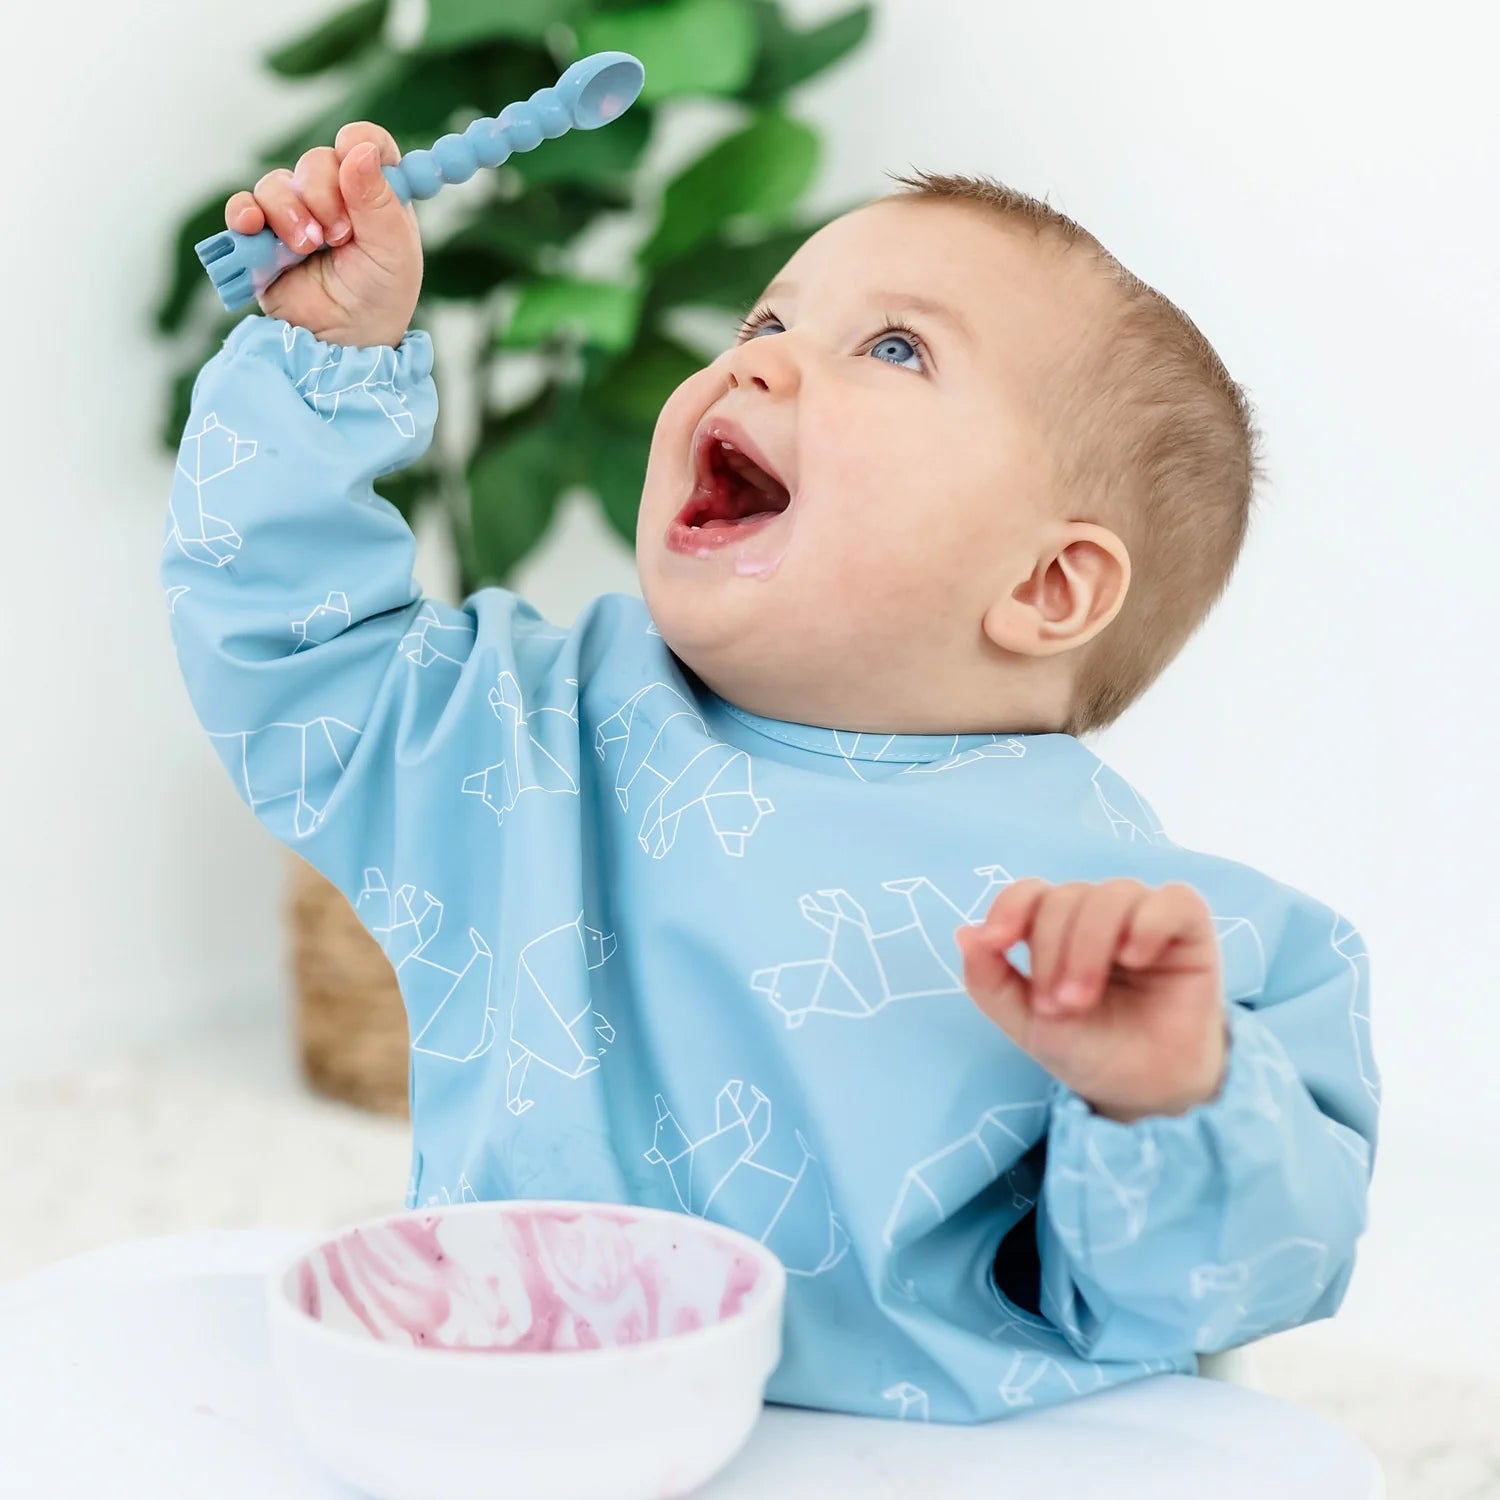 Baby eating with Tensils 